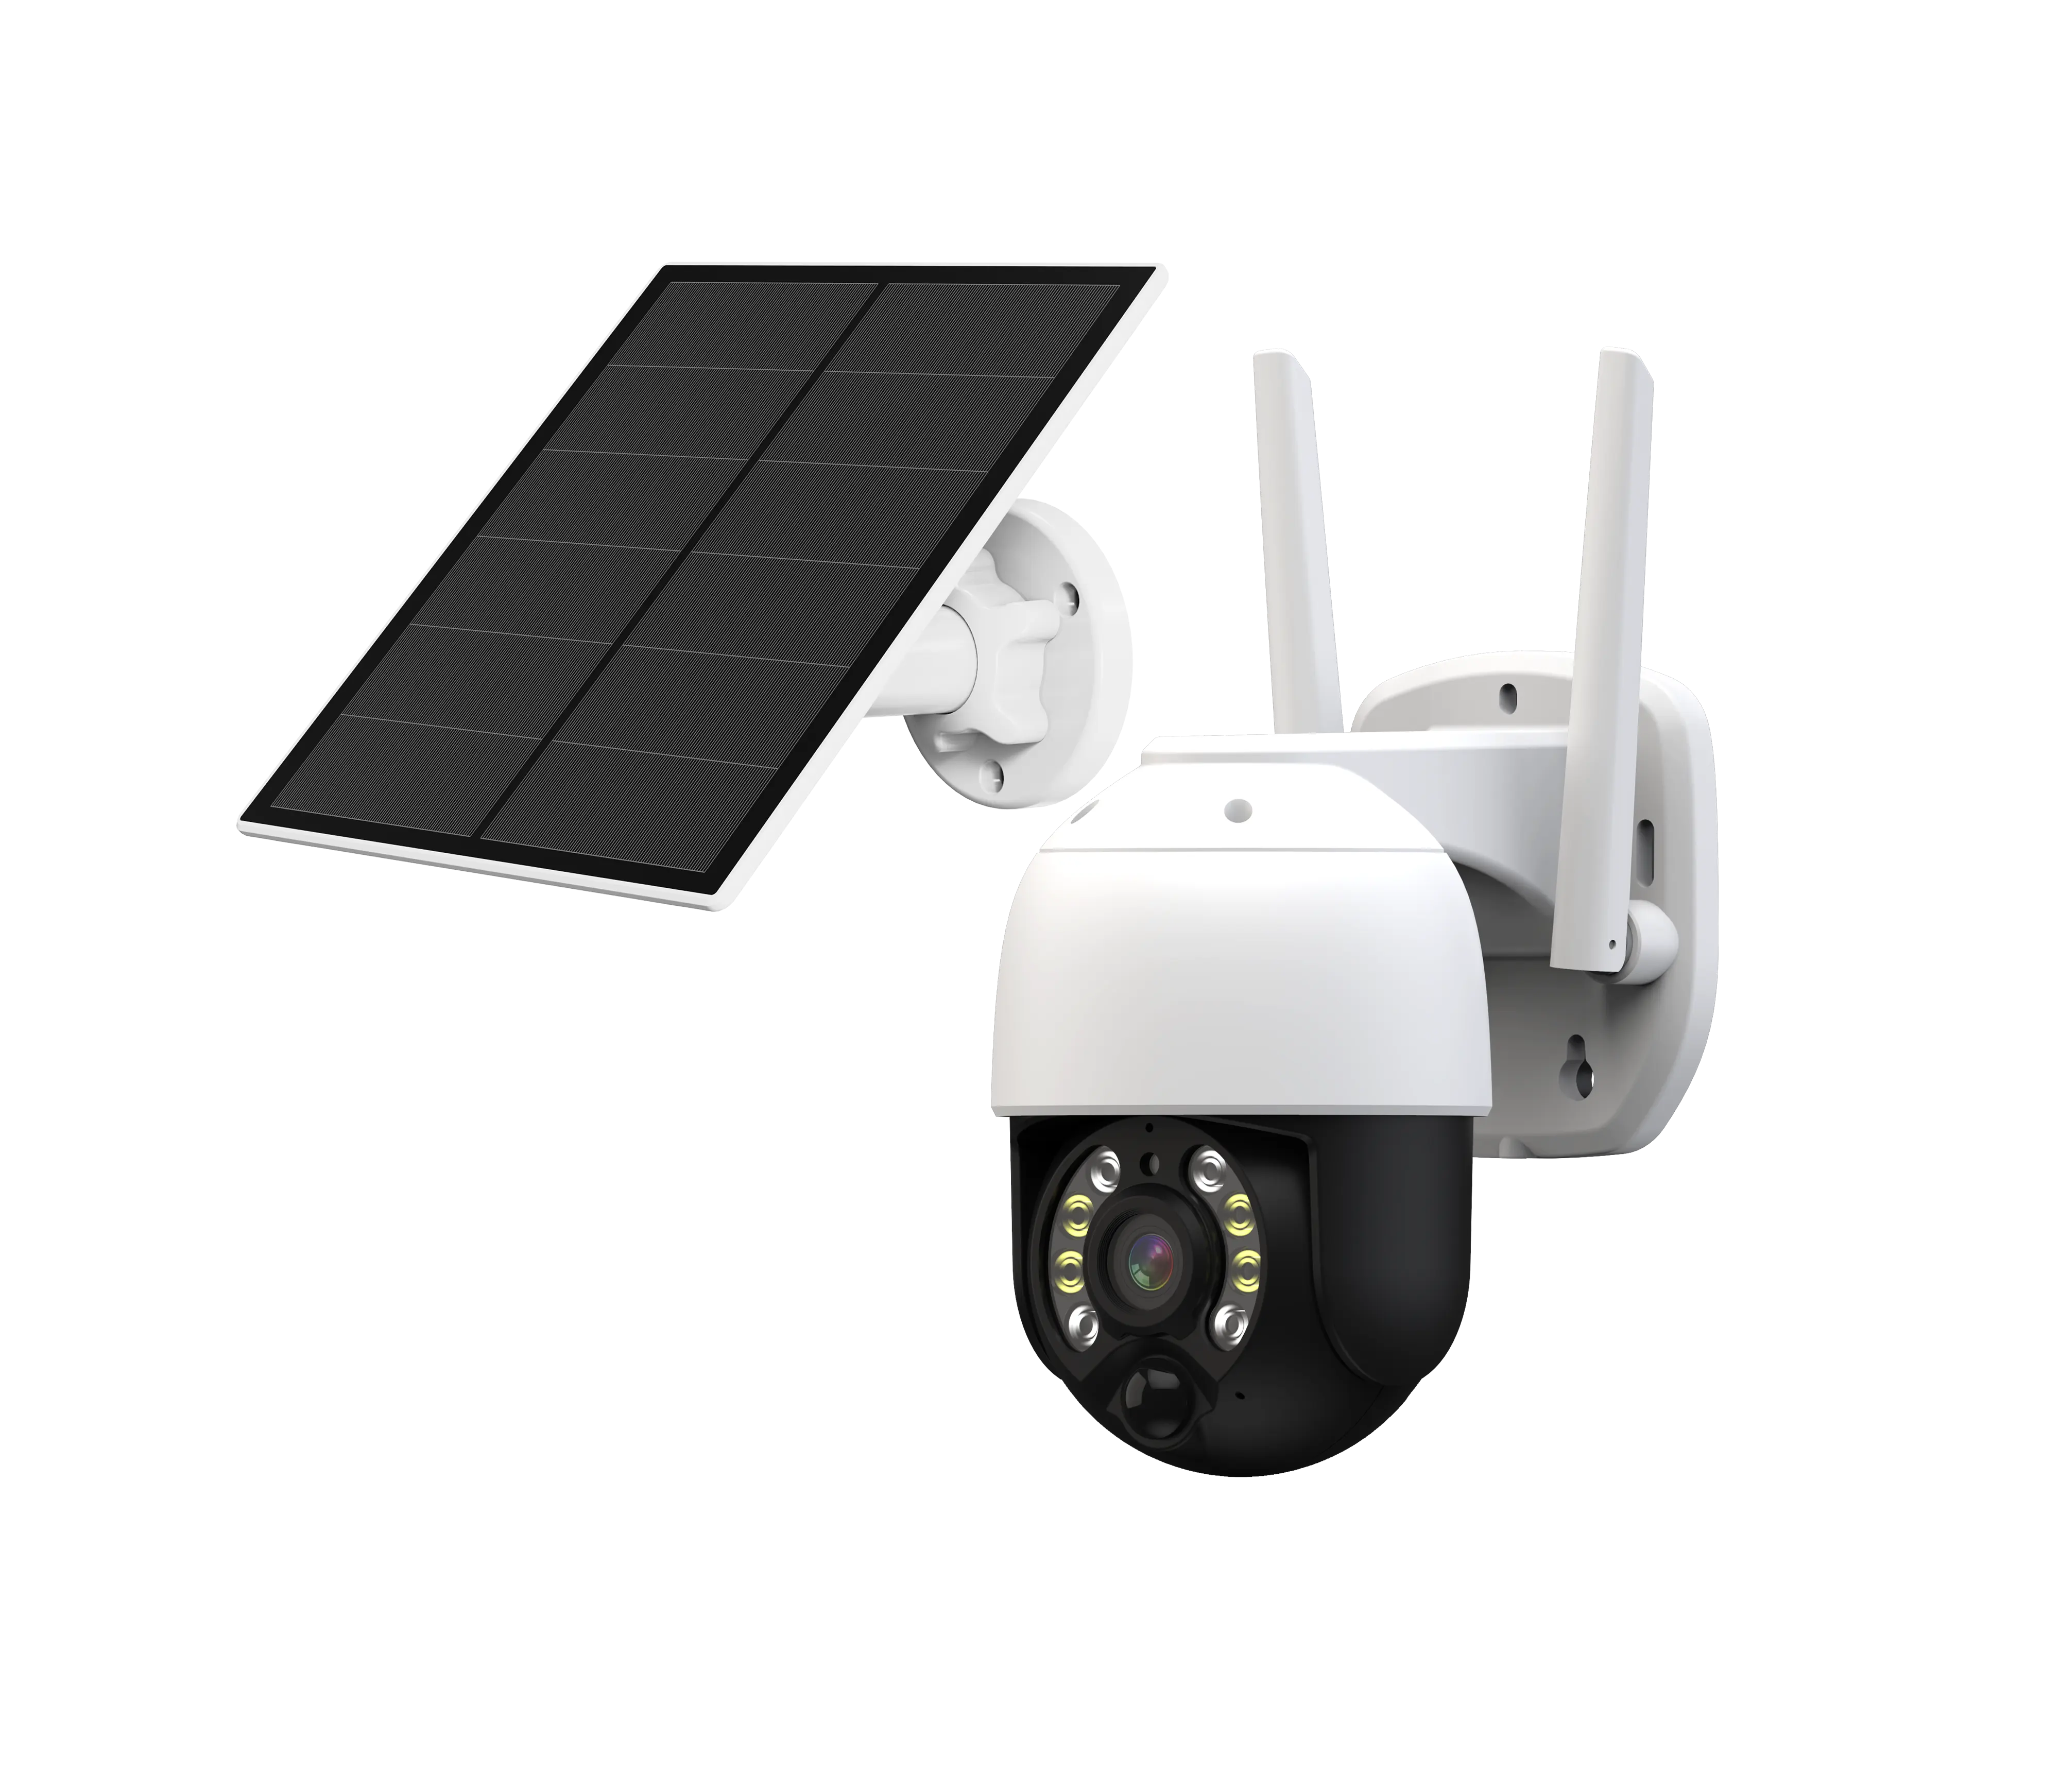 Hotsale solar wifi / 4g ptz camera with voice warning and night vision use icsee app